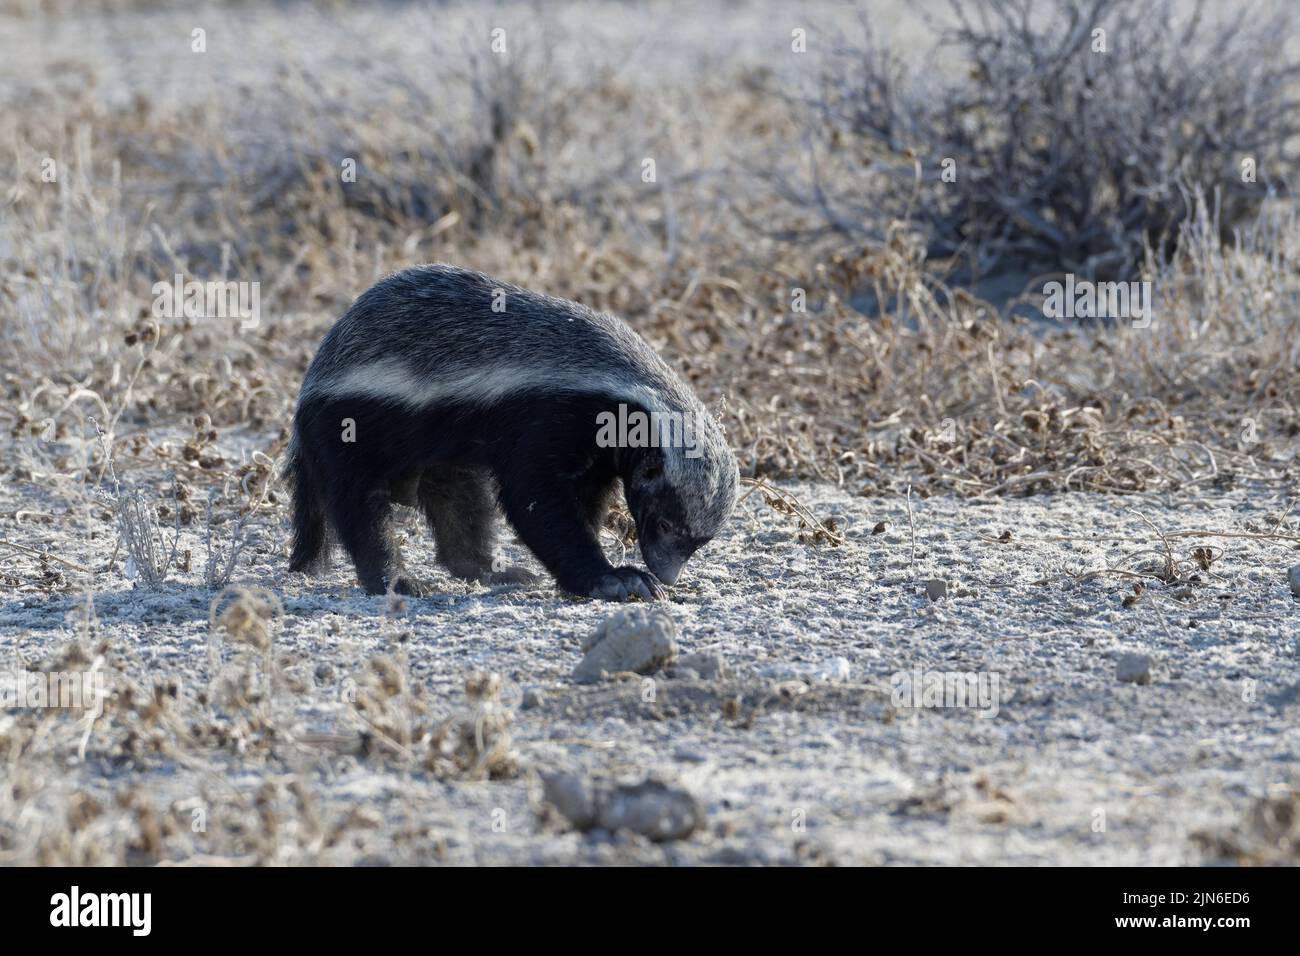 Honey badger (Mellivora capensis), adult male, in search of prey, Etosha National Park, Namibia, Africa Stock Photo